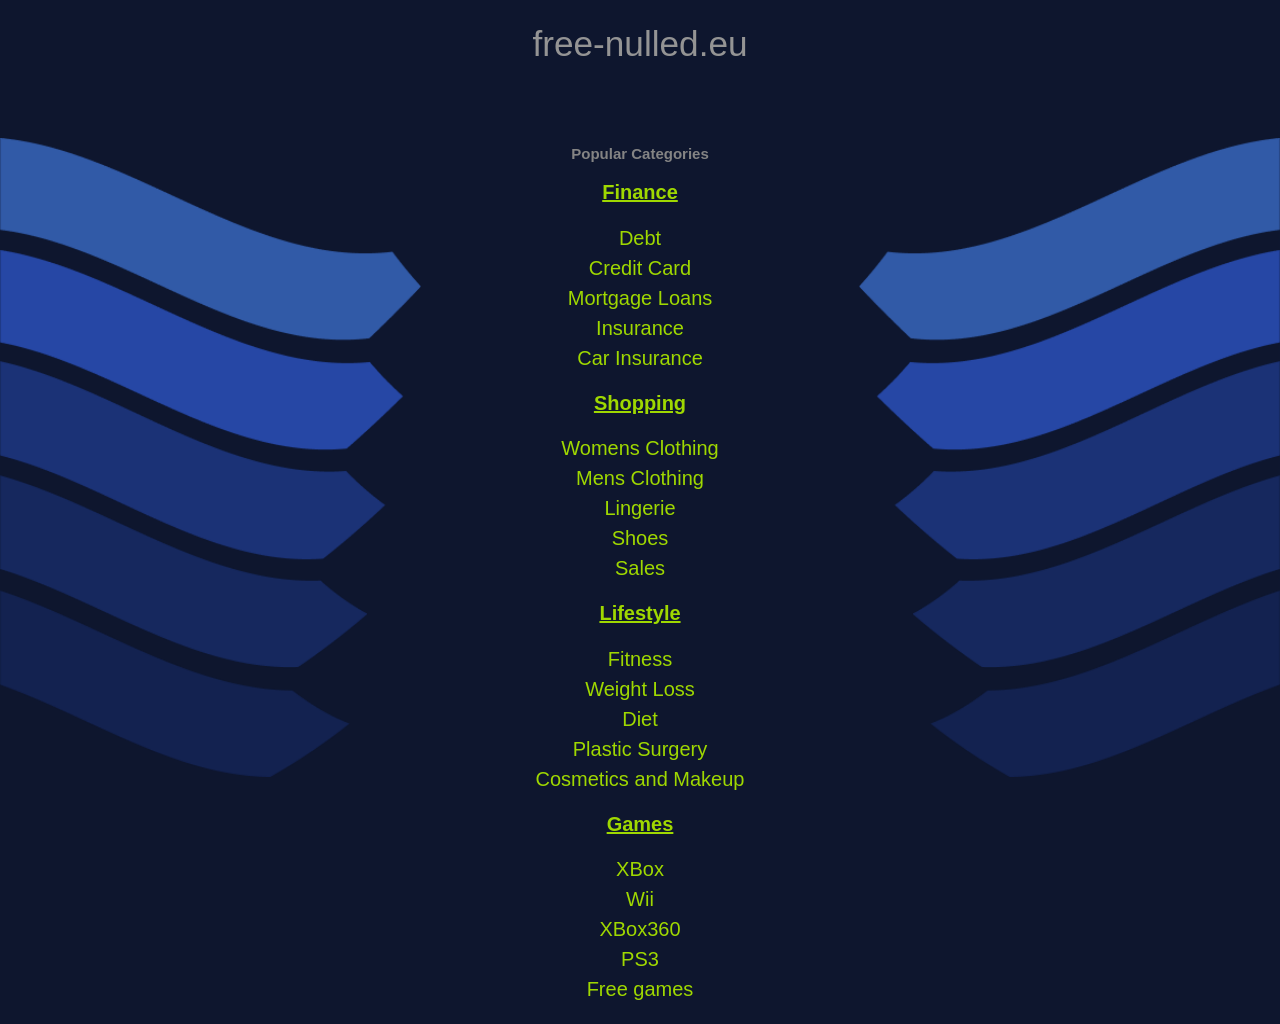 free-nulled.eu